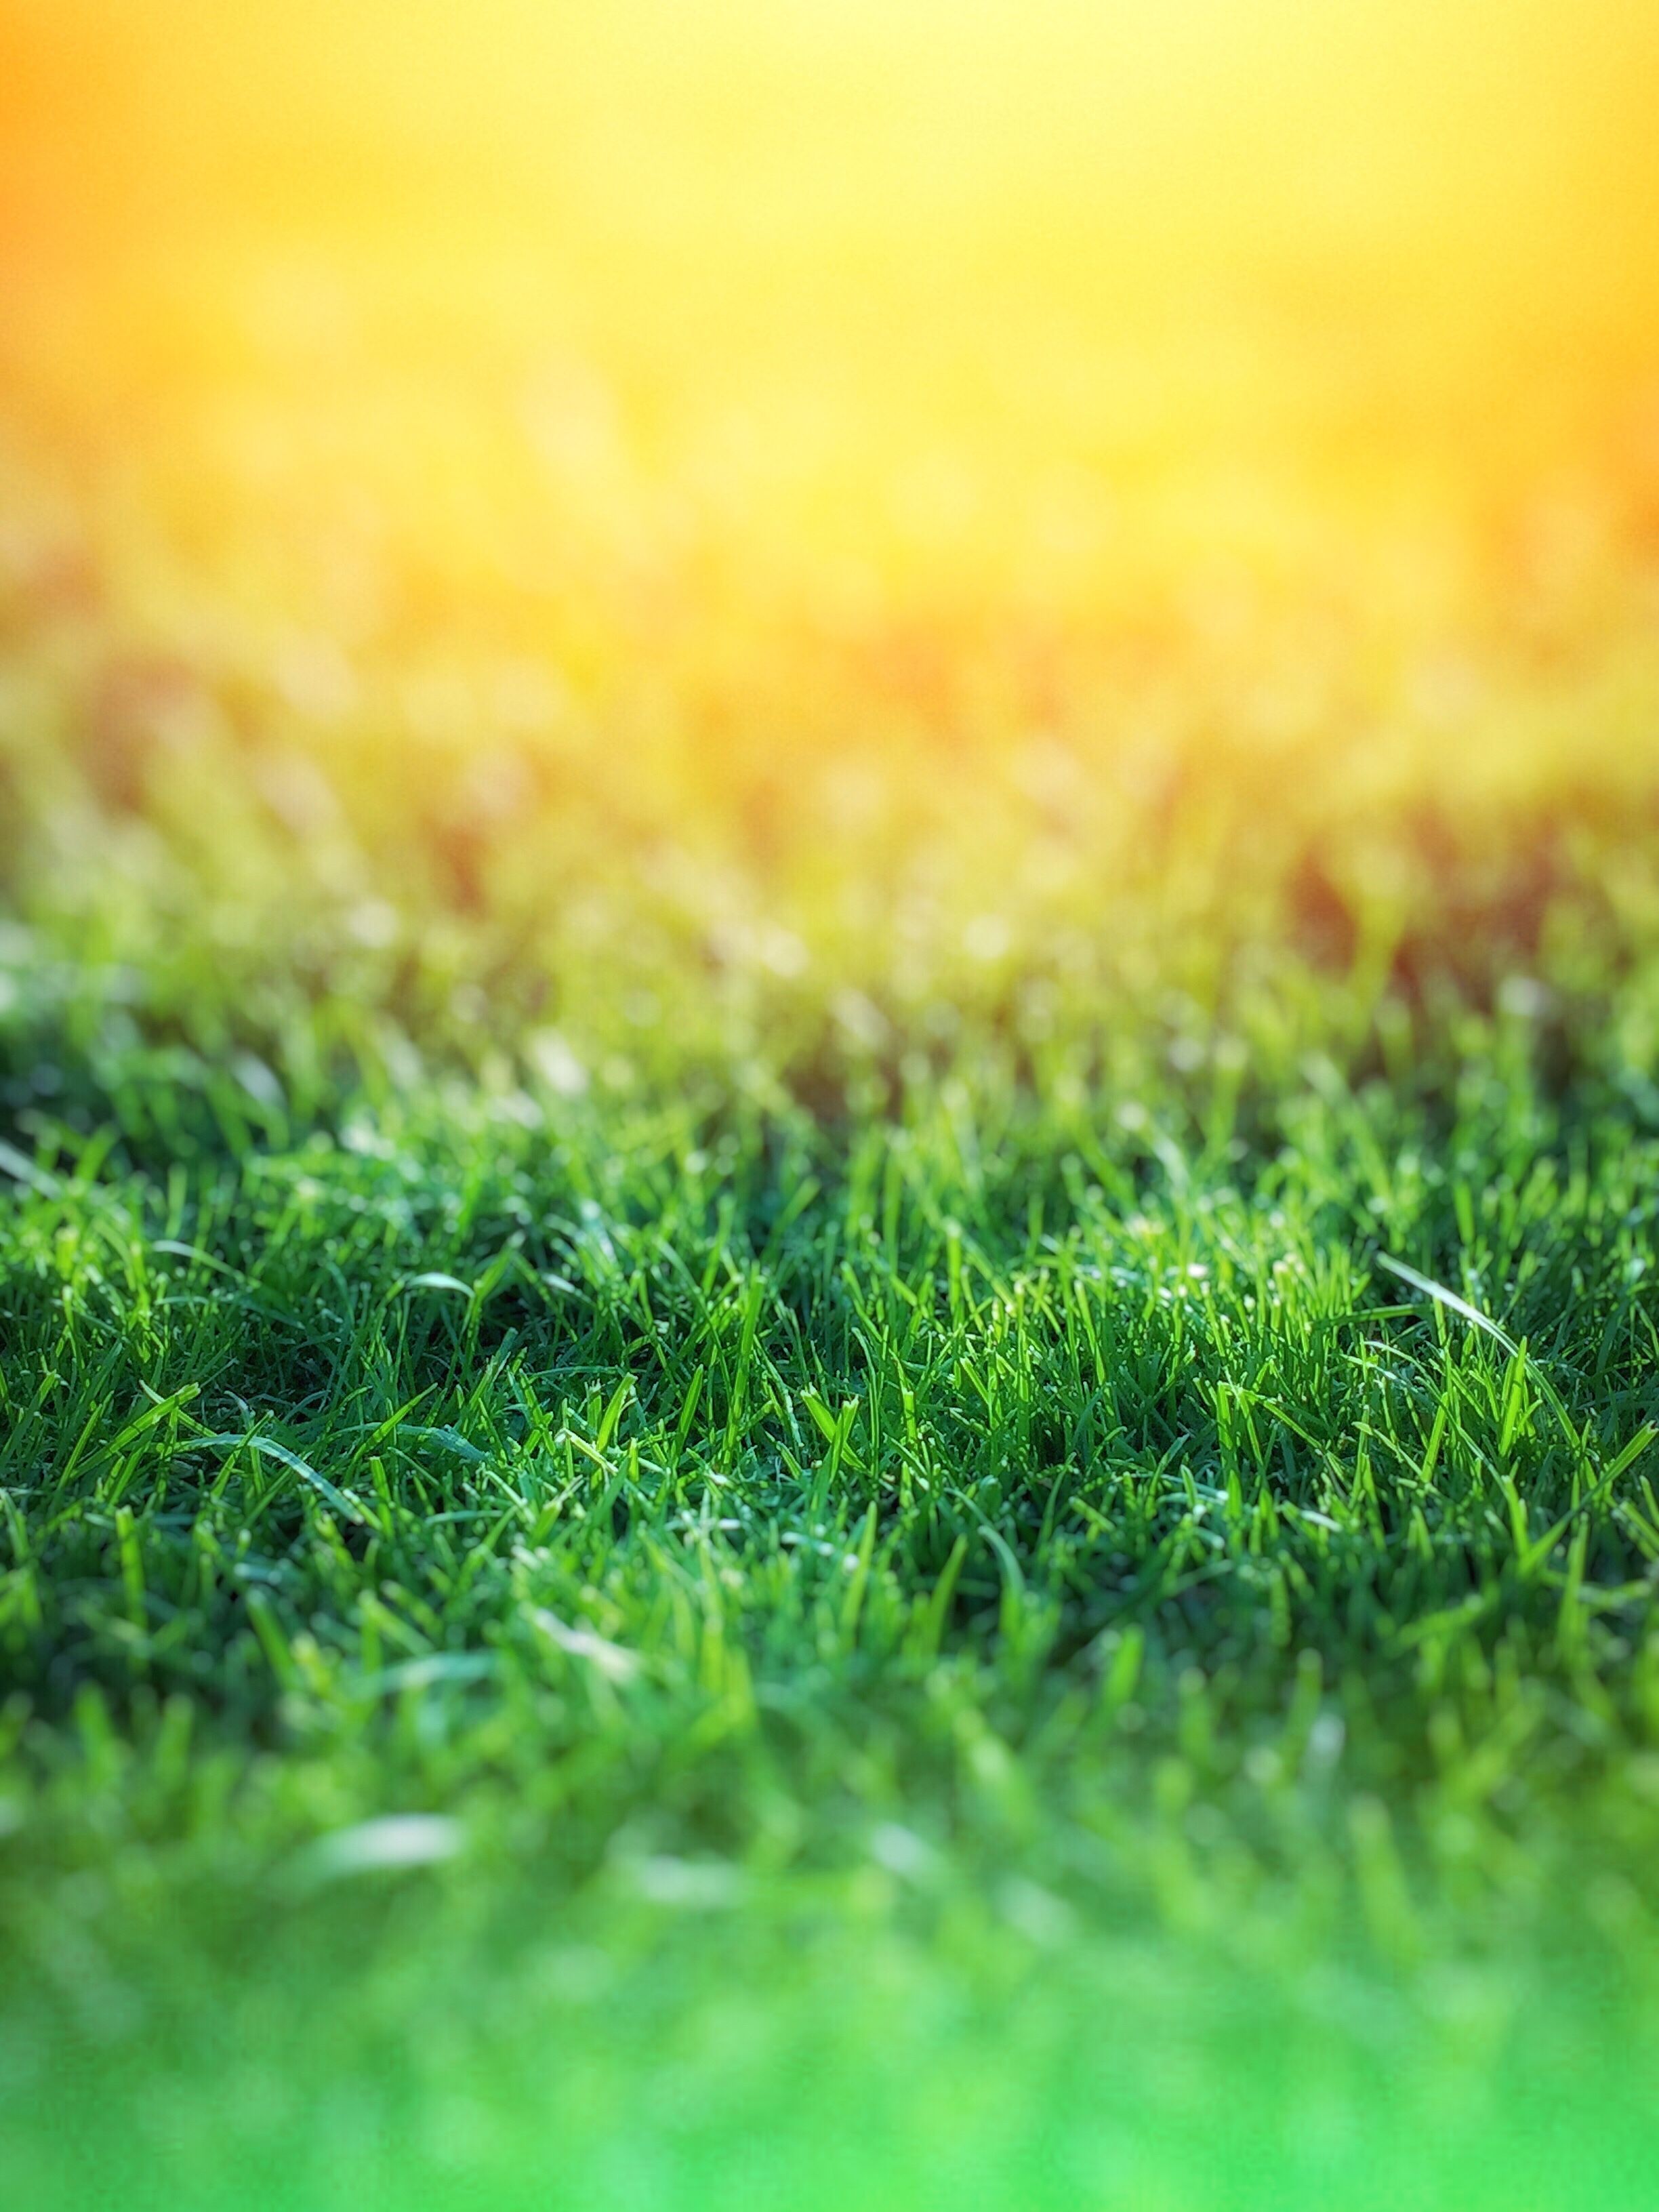 Green Grass over Yellow Background · Free